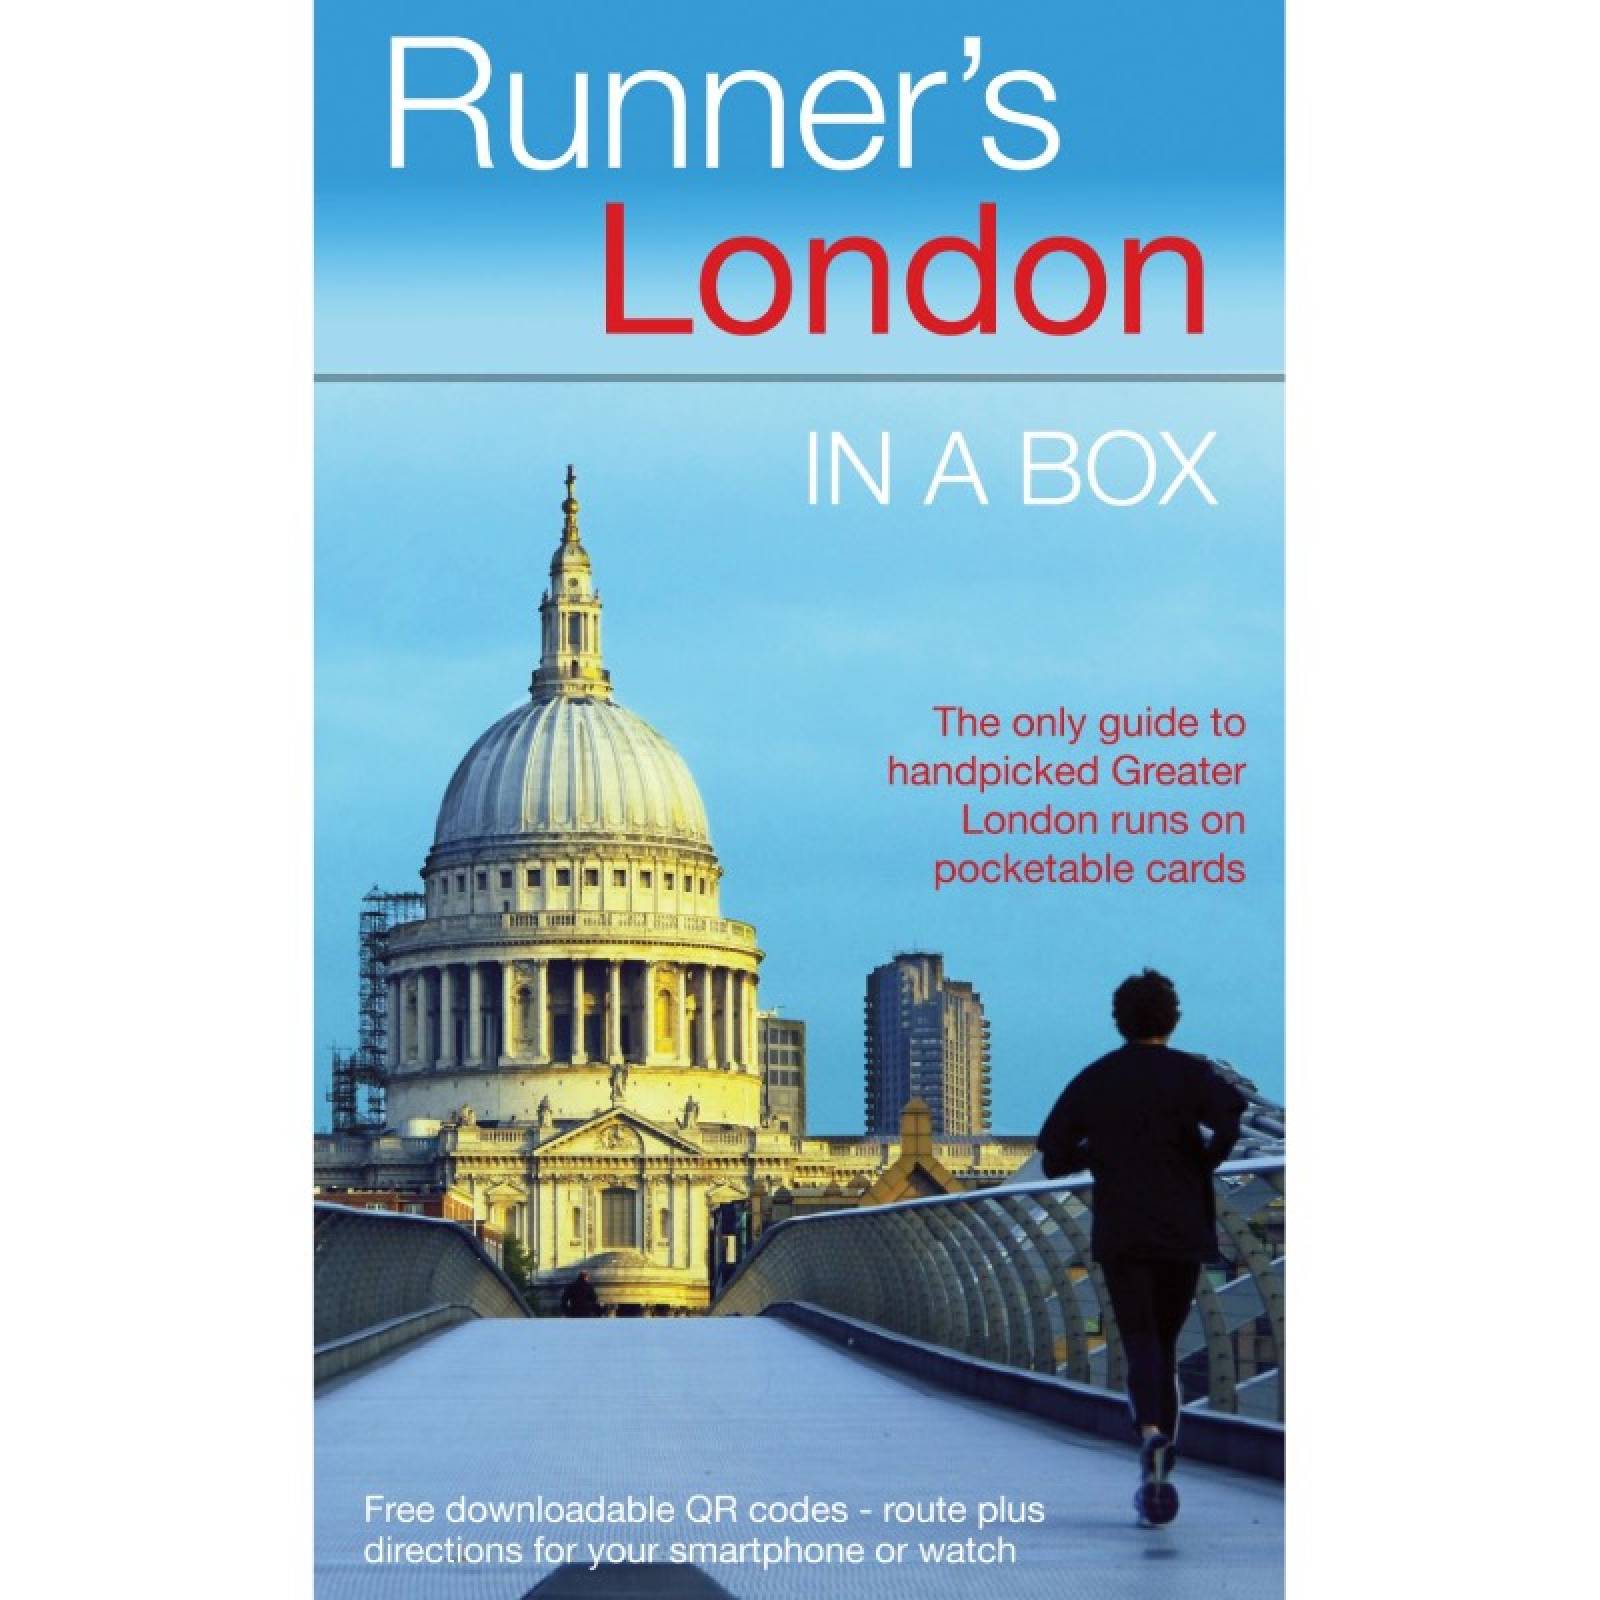 Runner's London In A Box thumbnails